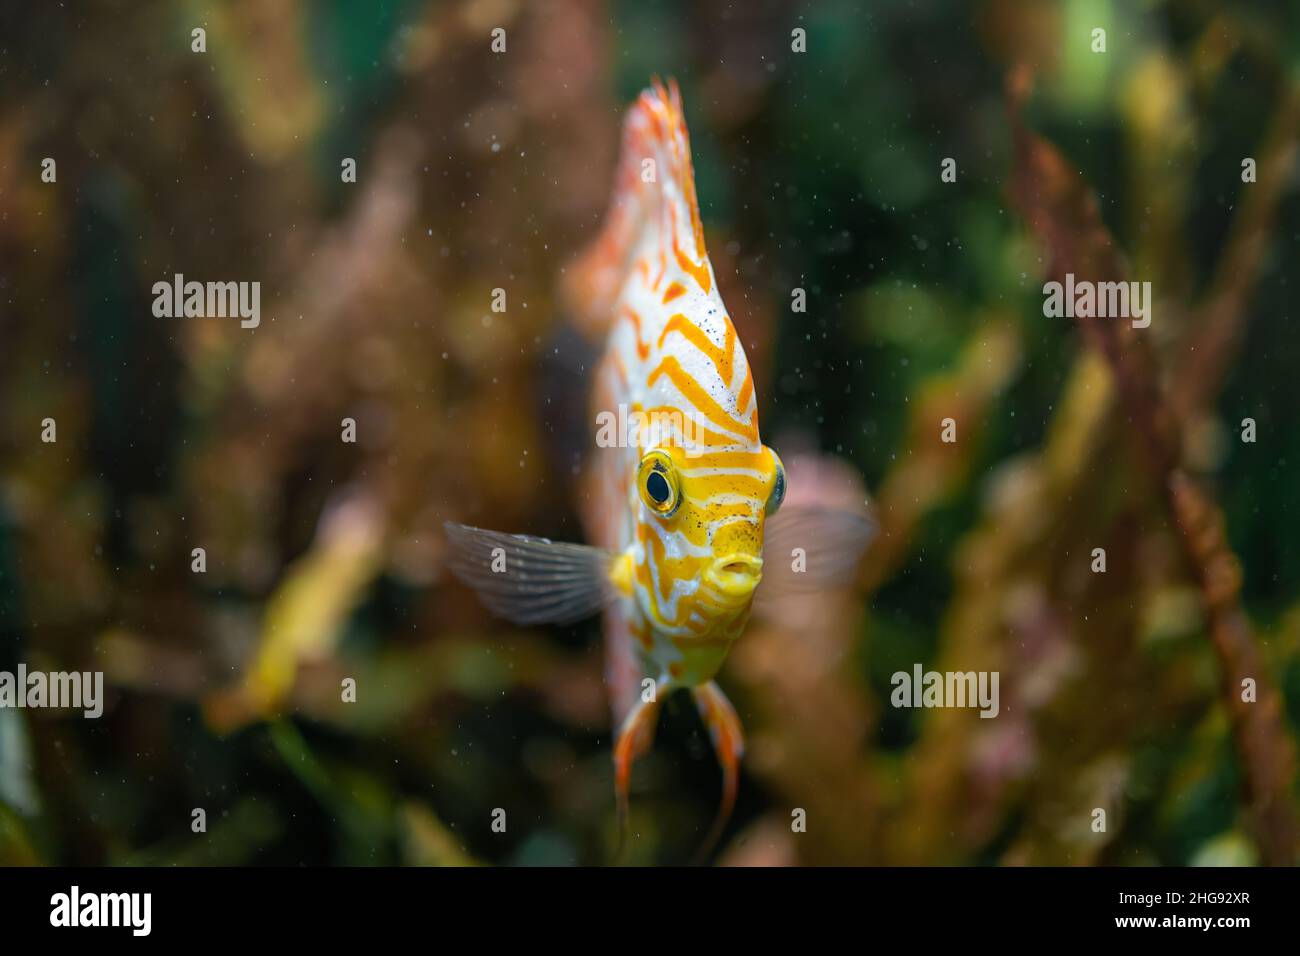 Discus fish under the water among algae. Front view Stock Photo